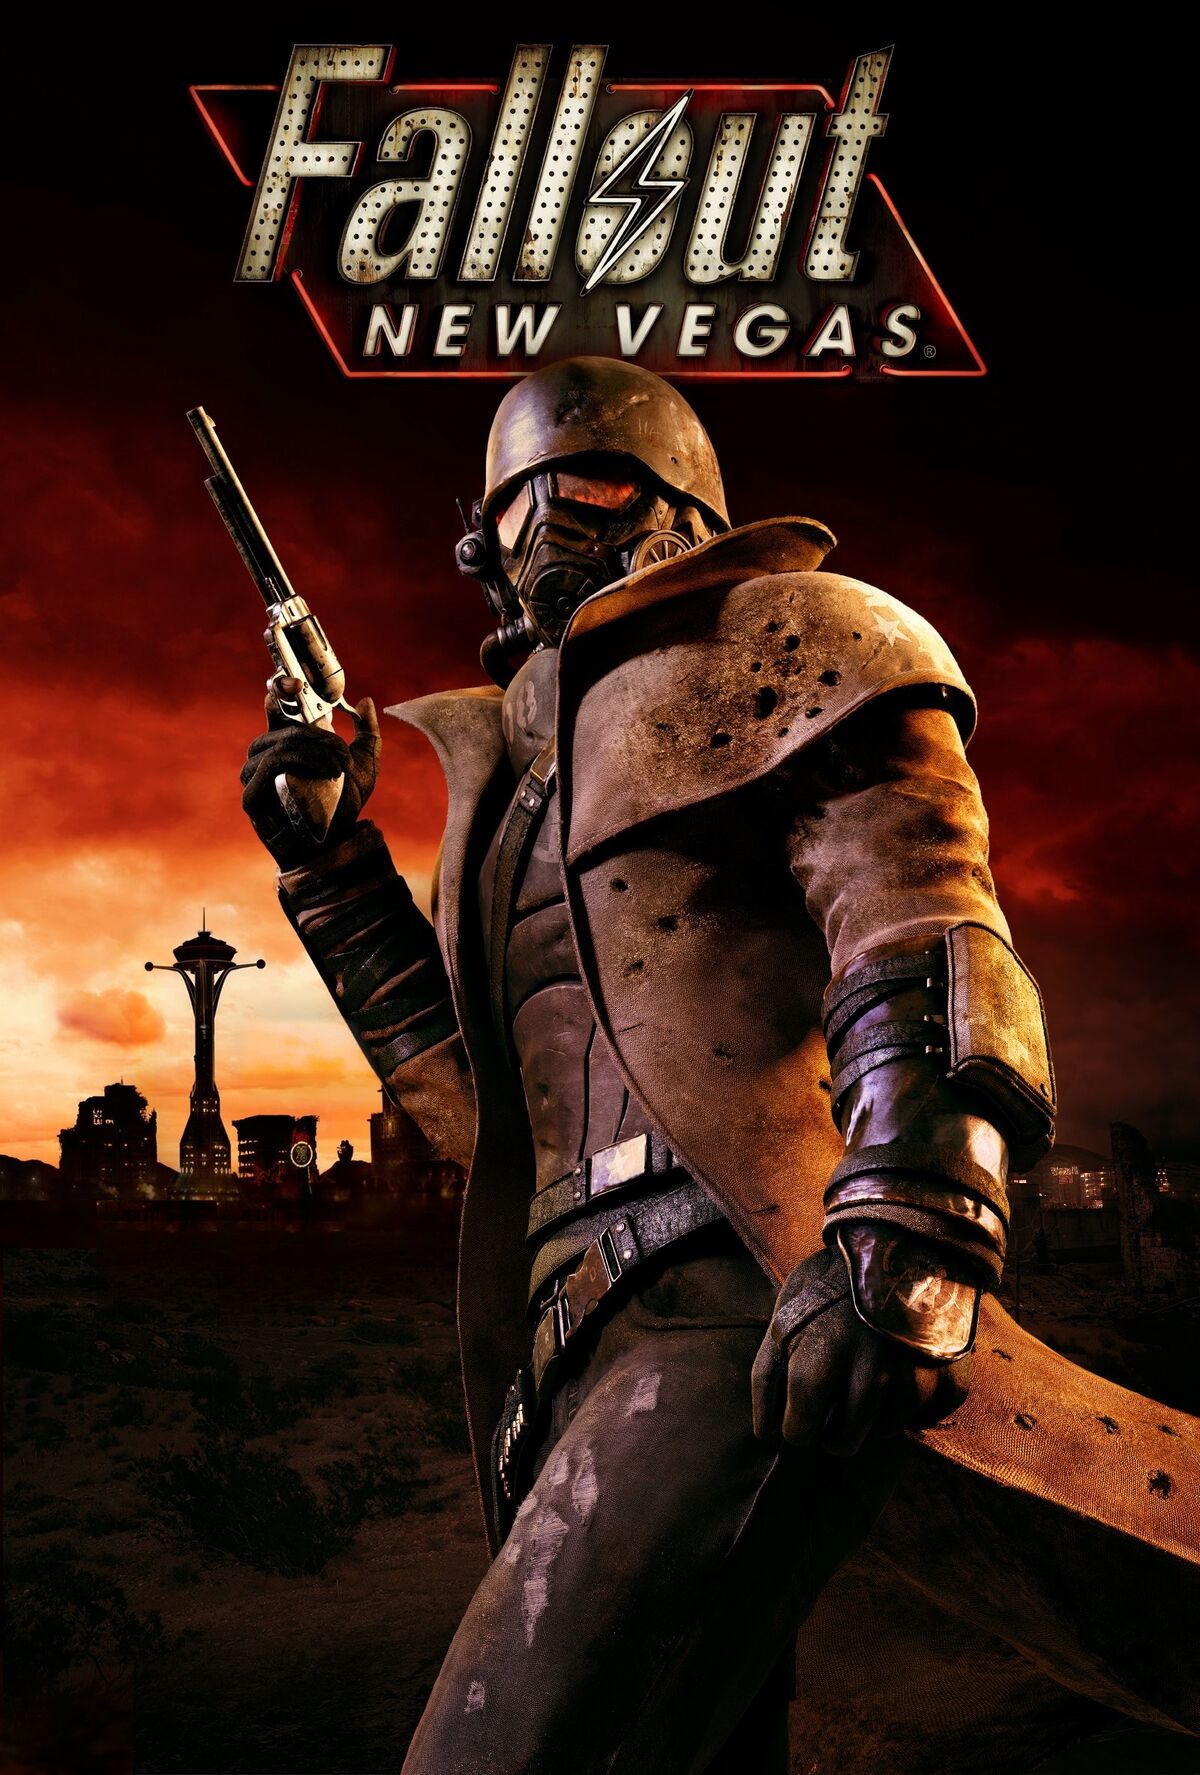 Fallout New Vegas The Vault Fallout Wiki Everything You Need To Know About Fallout 76 Fallout 4 New Vegas And More